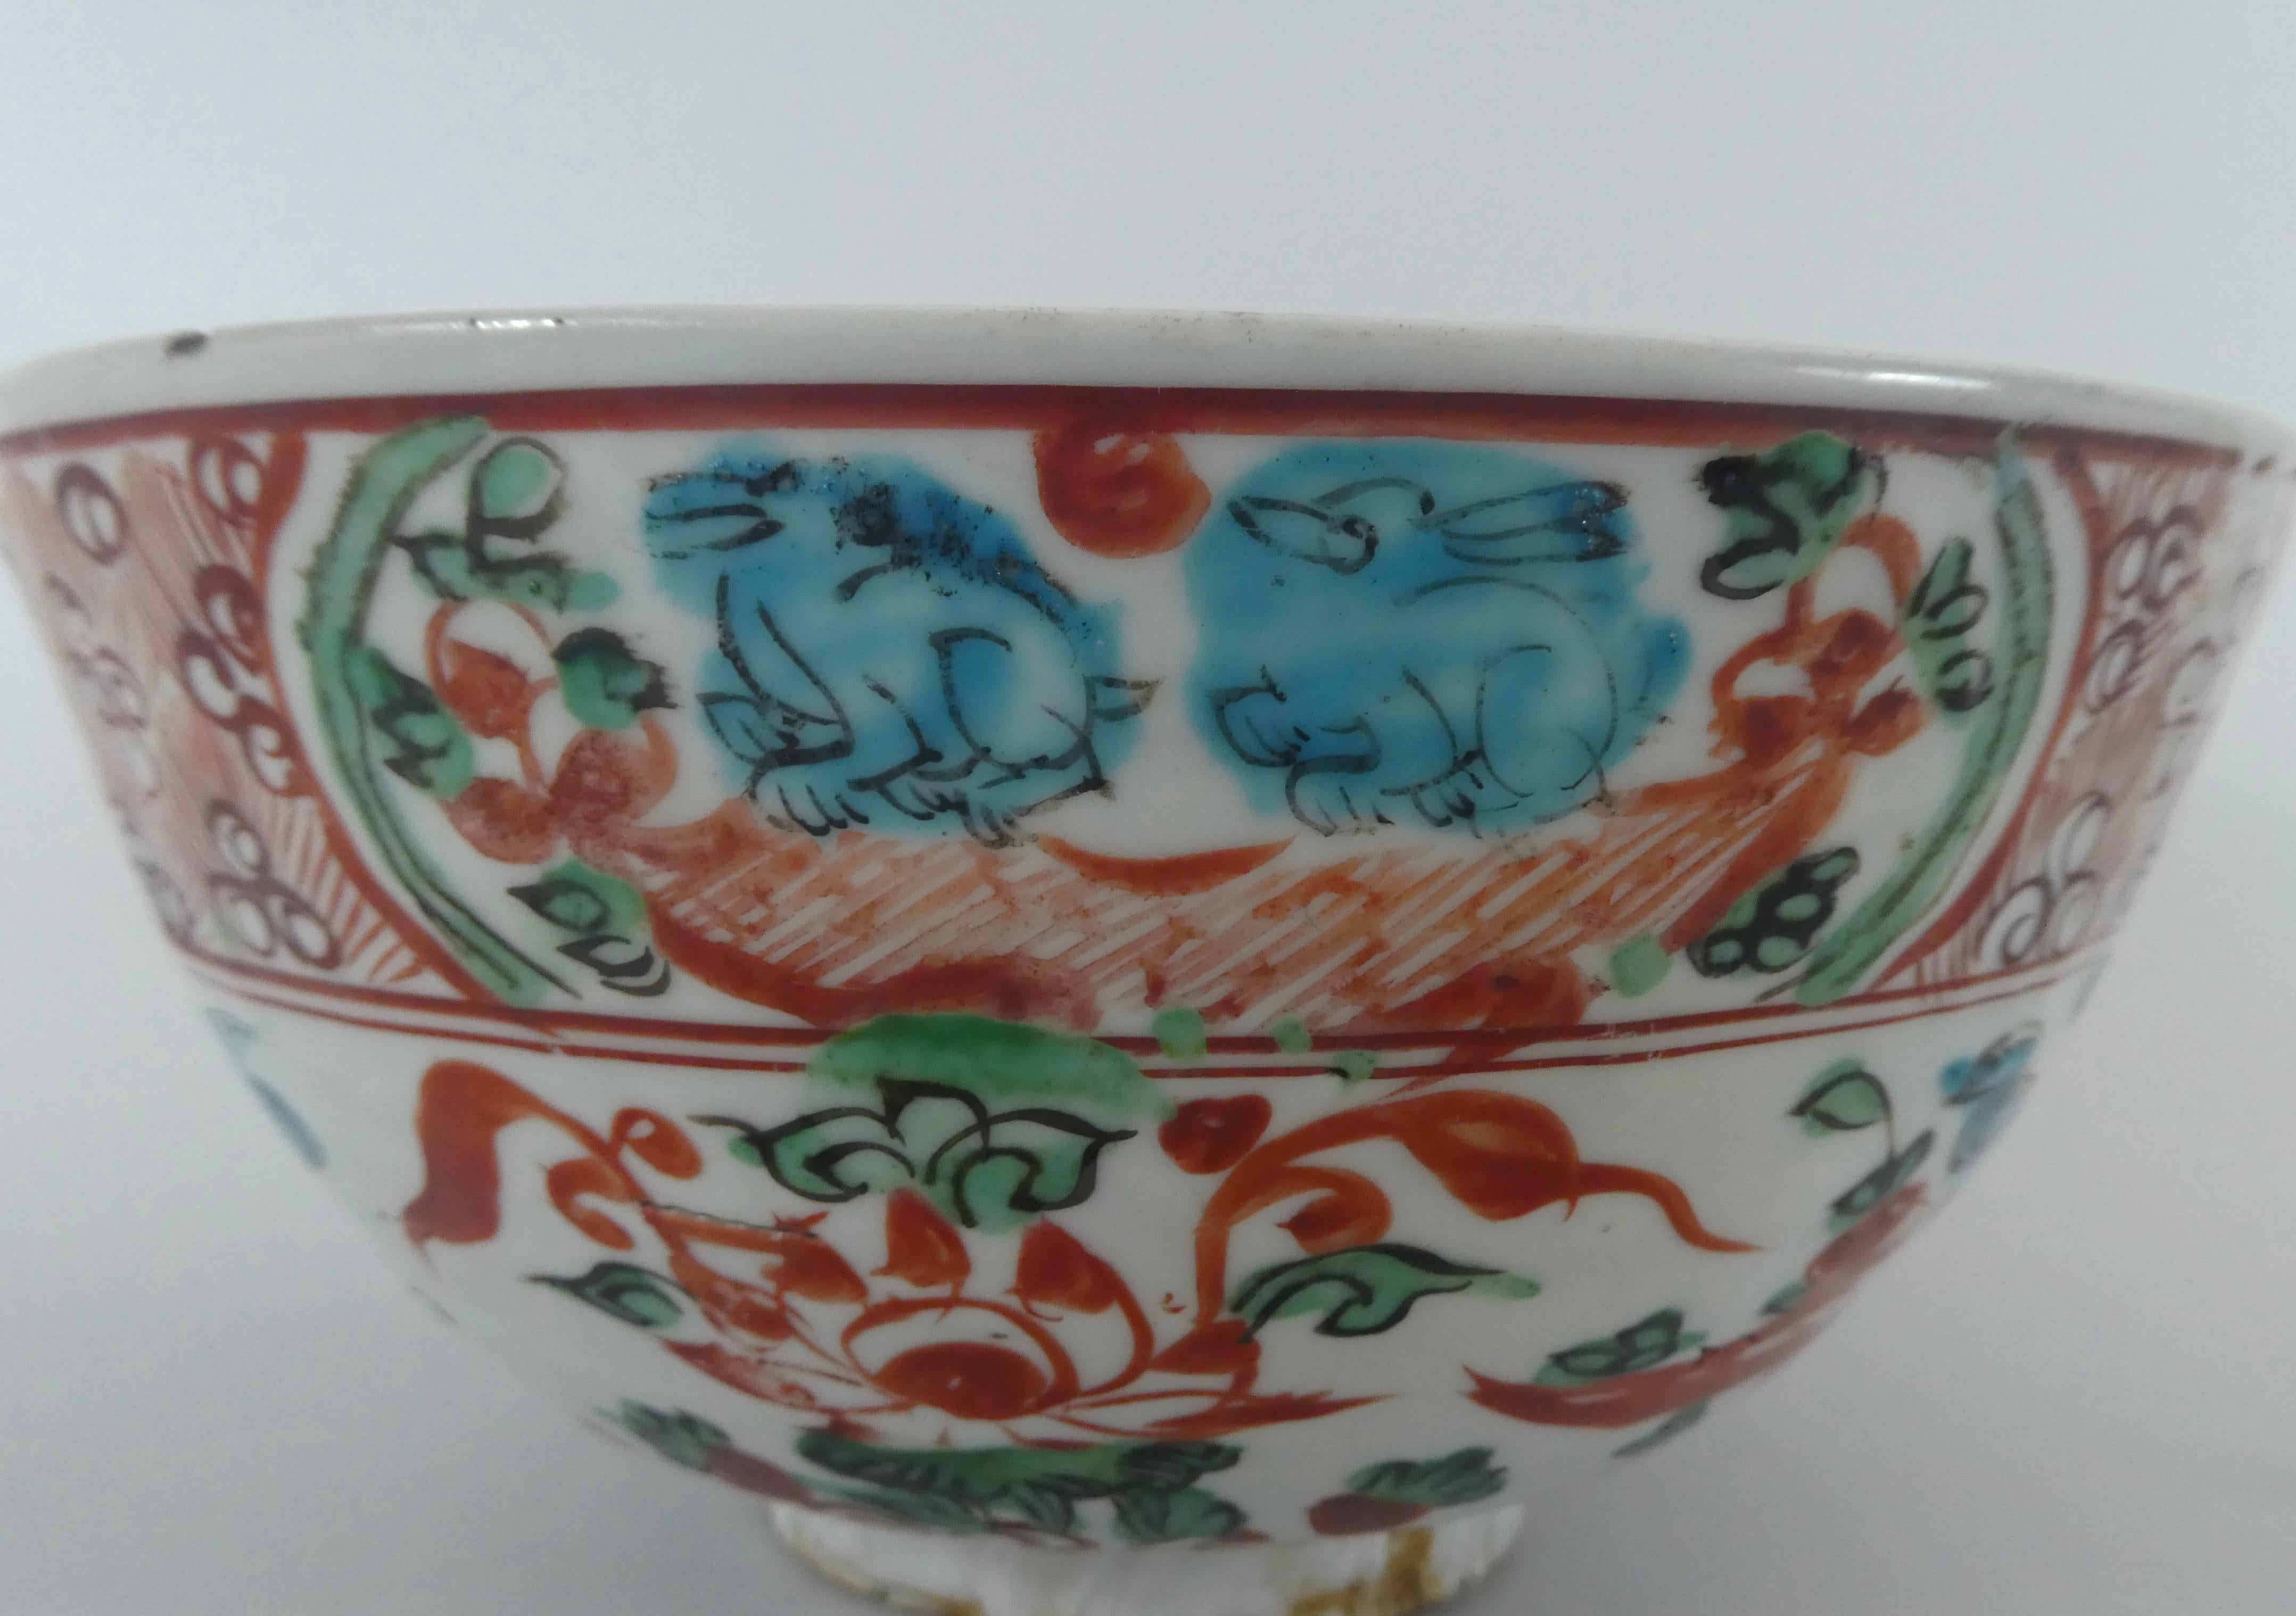 Chinese Swatow porcelain large bowl, circa 1600, Ming Dynasty. The deep sided bowl, exuberantly painted in polychrome enamels, with birds flying amongst flowering plants. The border with panels of rabbits, fish, ducks and birds, outlined in black,